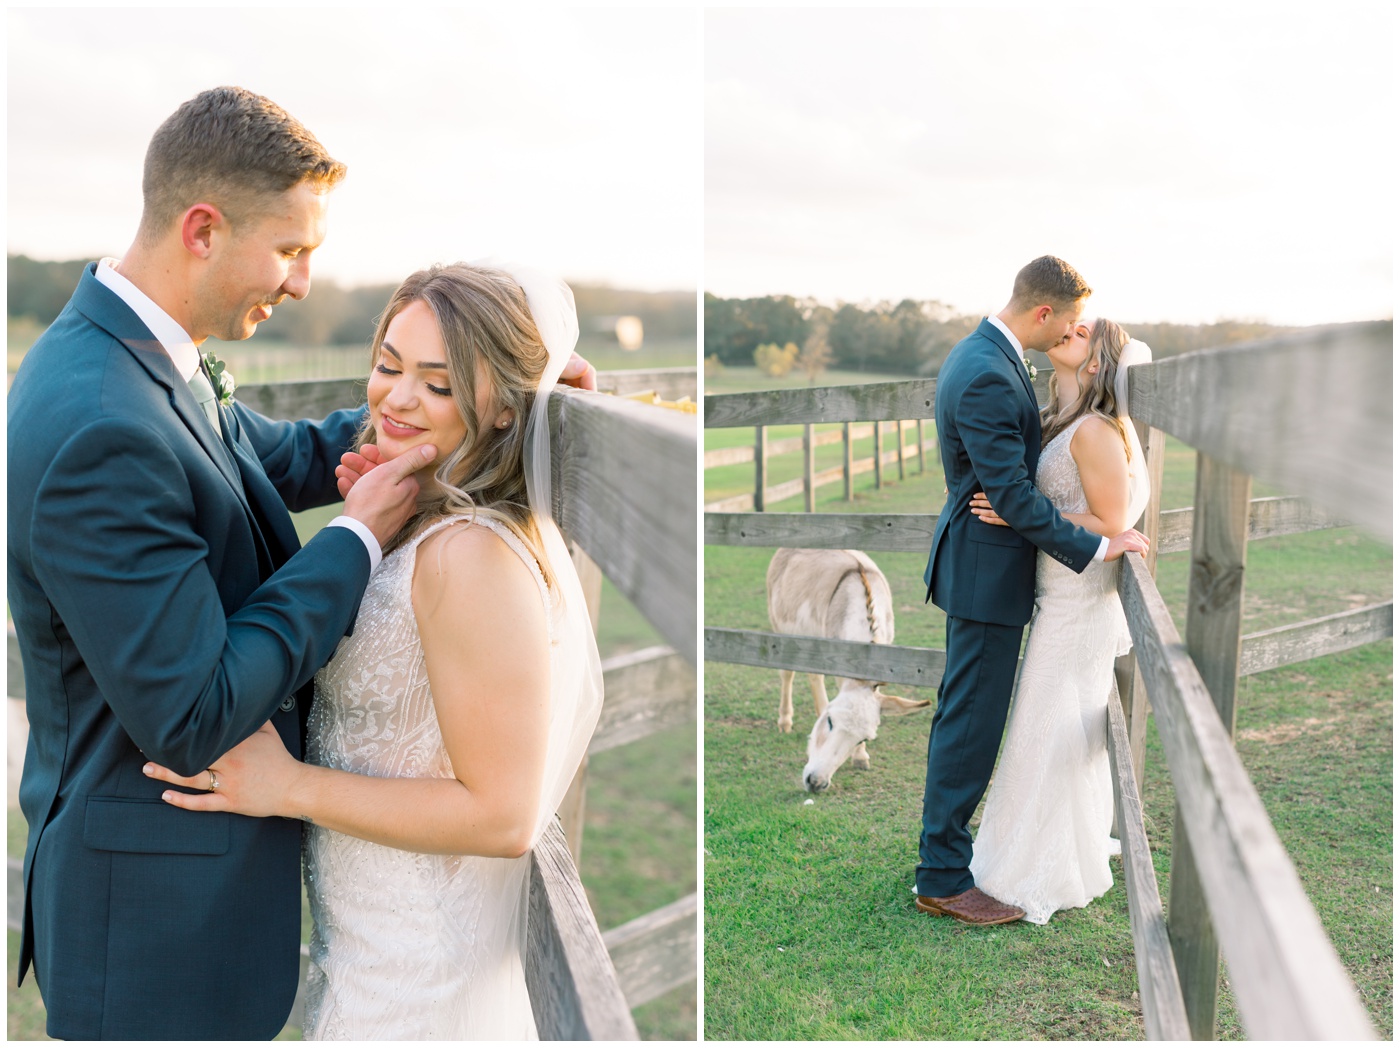 Texas farmhouse wedding | the groom pulls his bride in softly for a kiss with a donkey in the background